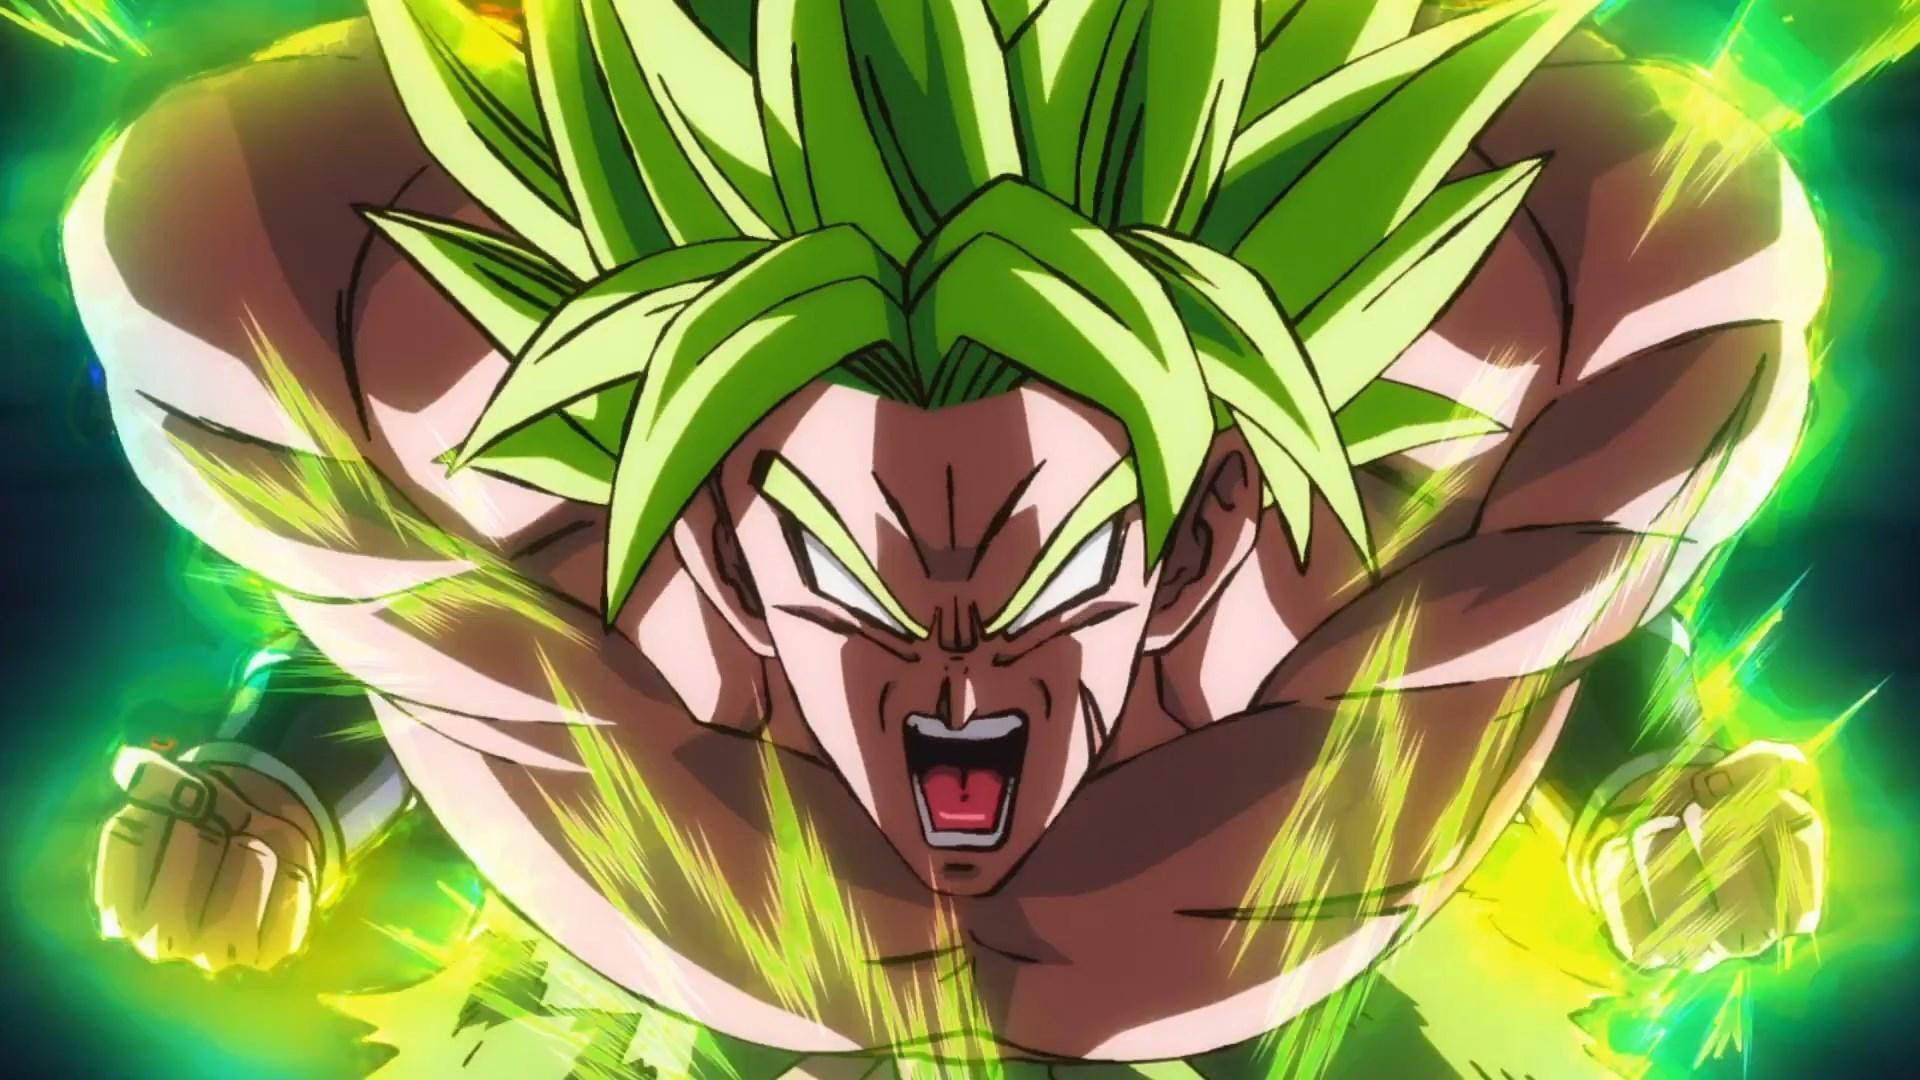 20 best characters with green hair